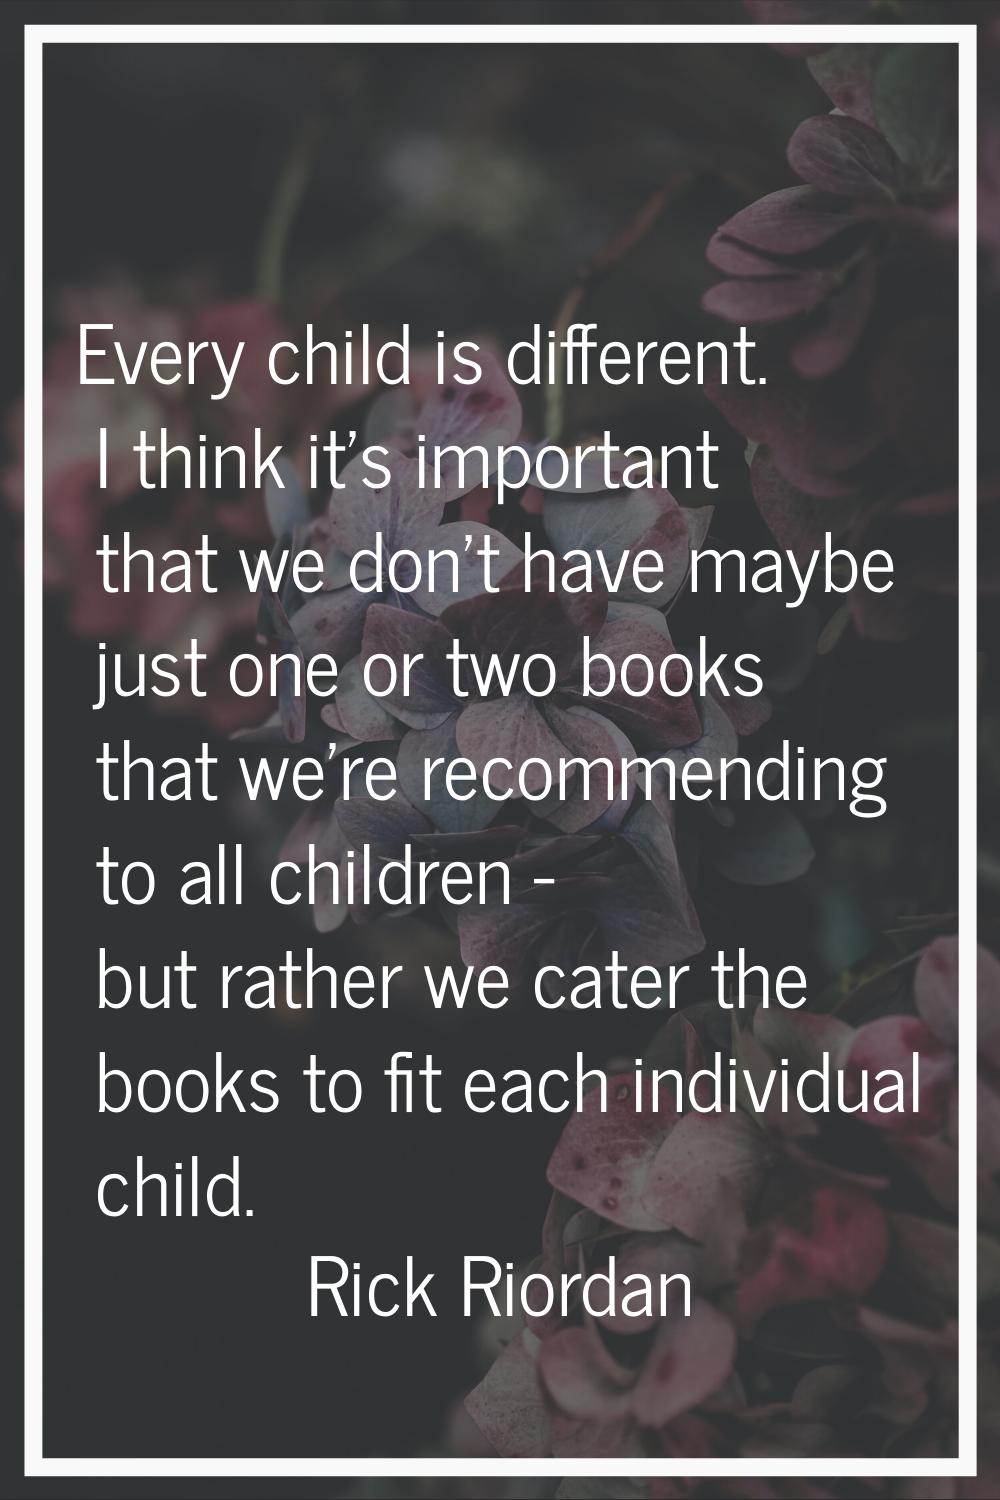 Every child is different. I think it's important that we don't have maybe just one or two books tha